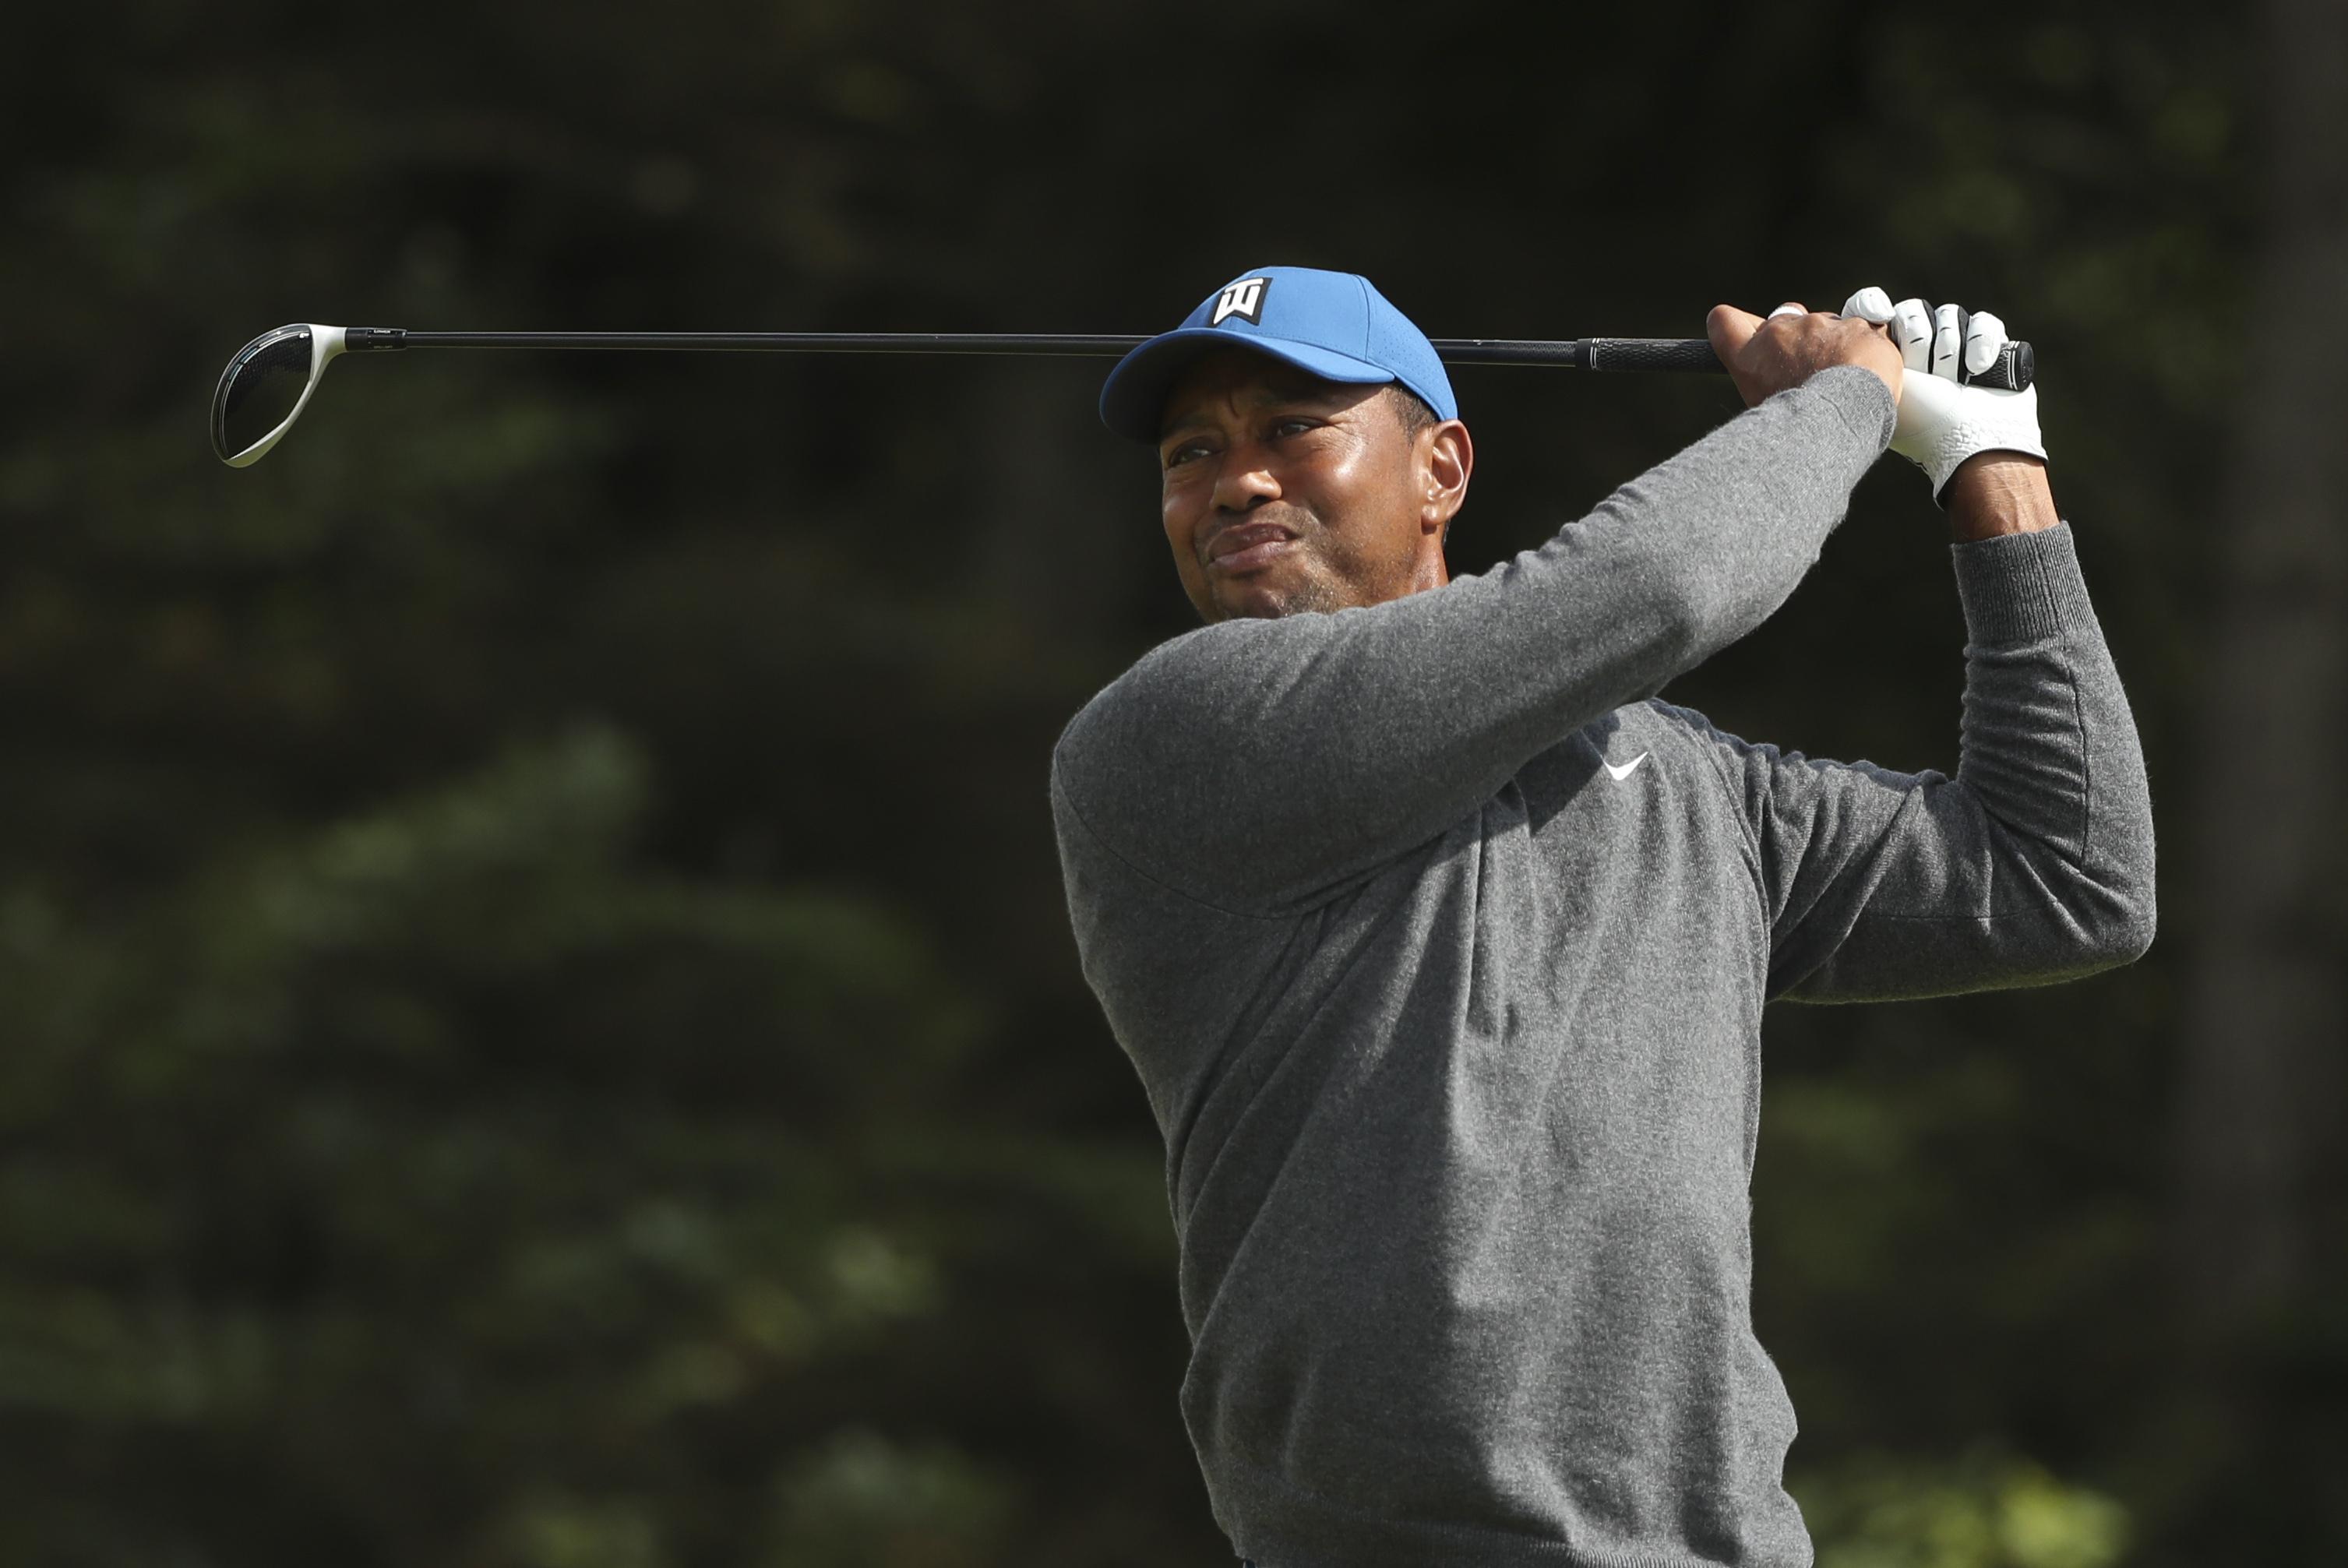 The usual crowd support saw an unusual score for Tiger Woods | The Spokesman-Review3014 x 2013